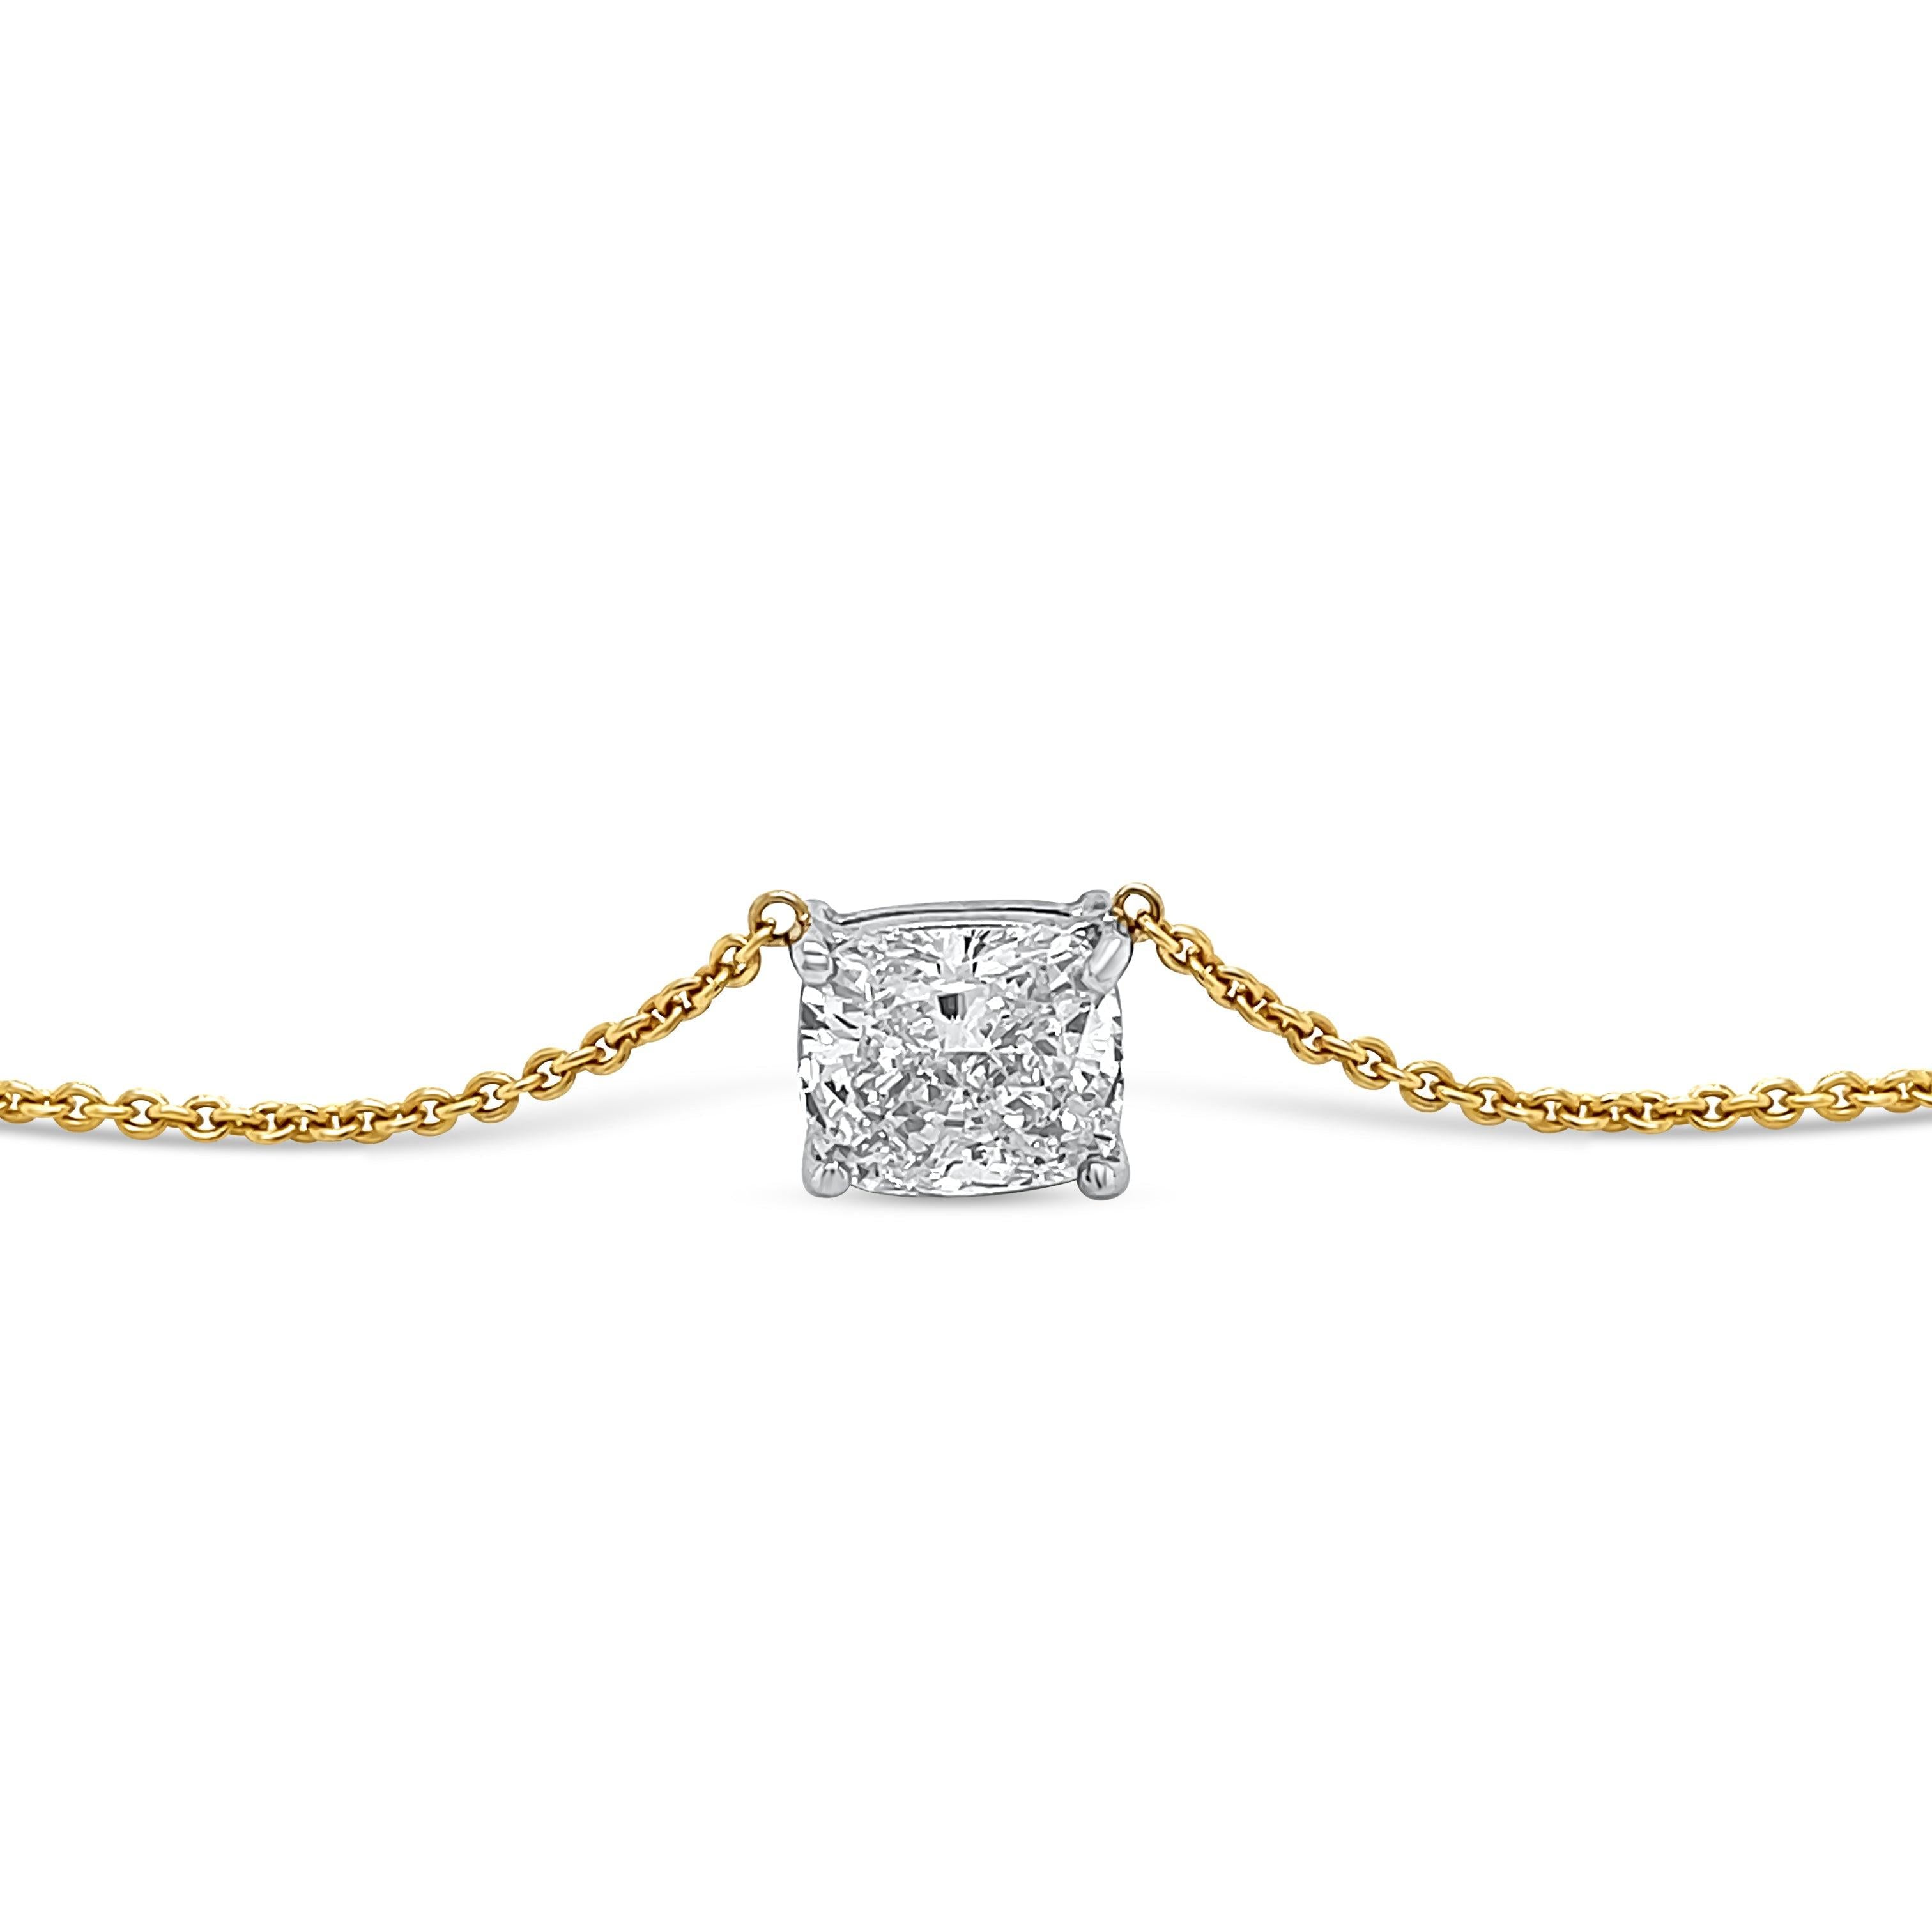 2.56 Carat Cushion Cut Lab Grown Diamond Floating Connected Necklace in 18K Gold-Necklaces-ASSAY